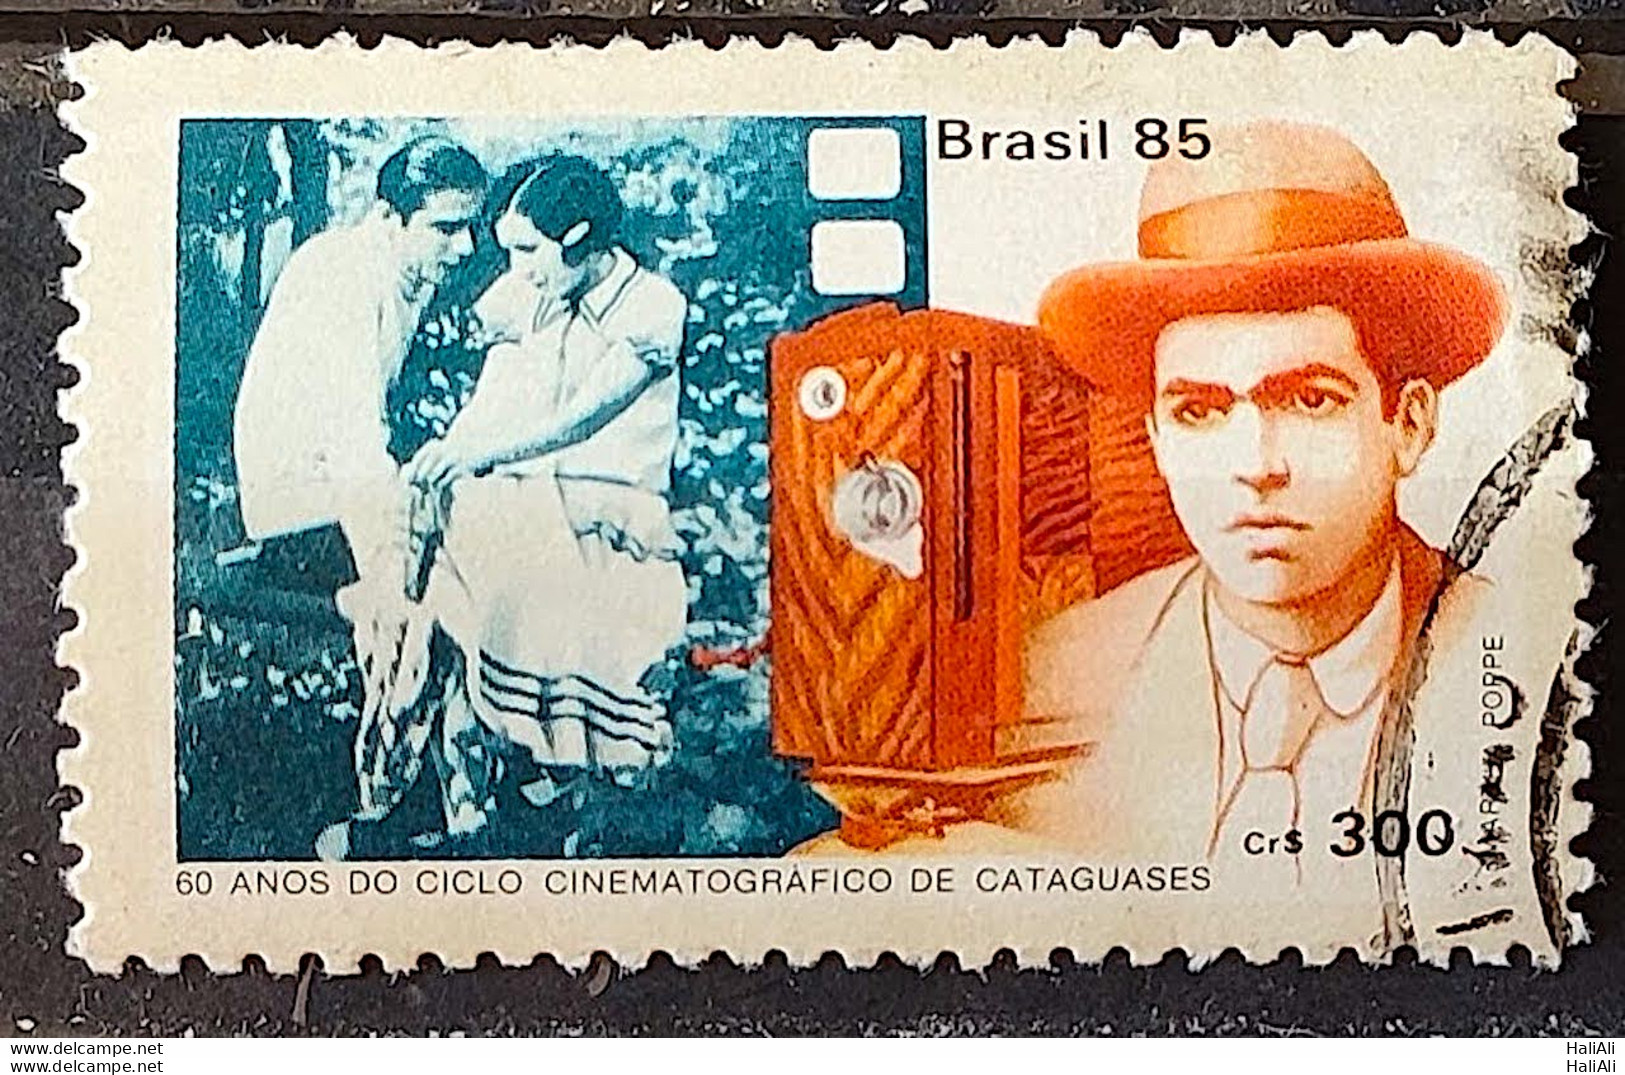 C 1471 Brazil Stamp 60 Years Cinema From Cataguases Movie 1985 Circulated 1 - Used Stamps